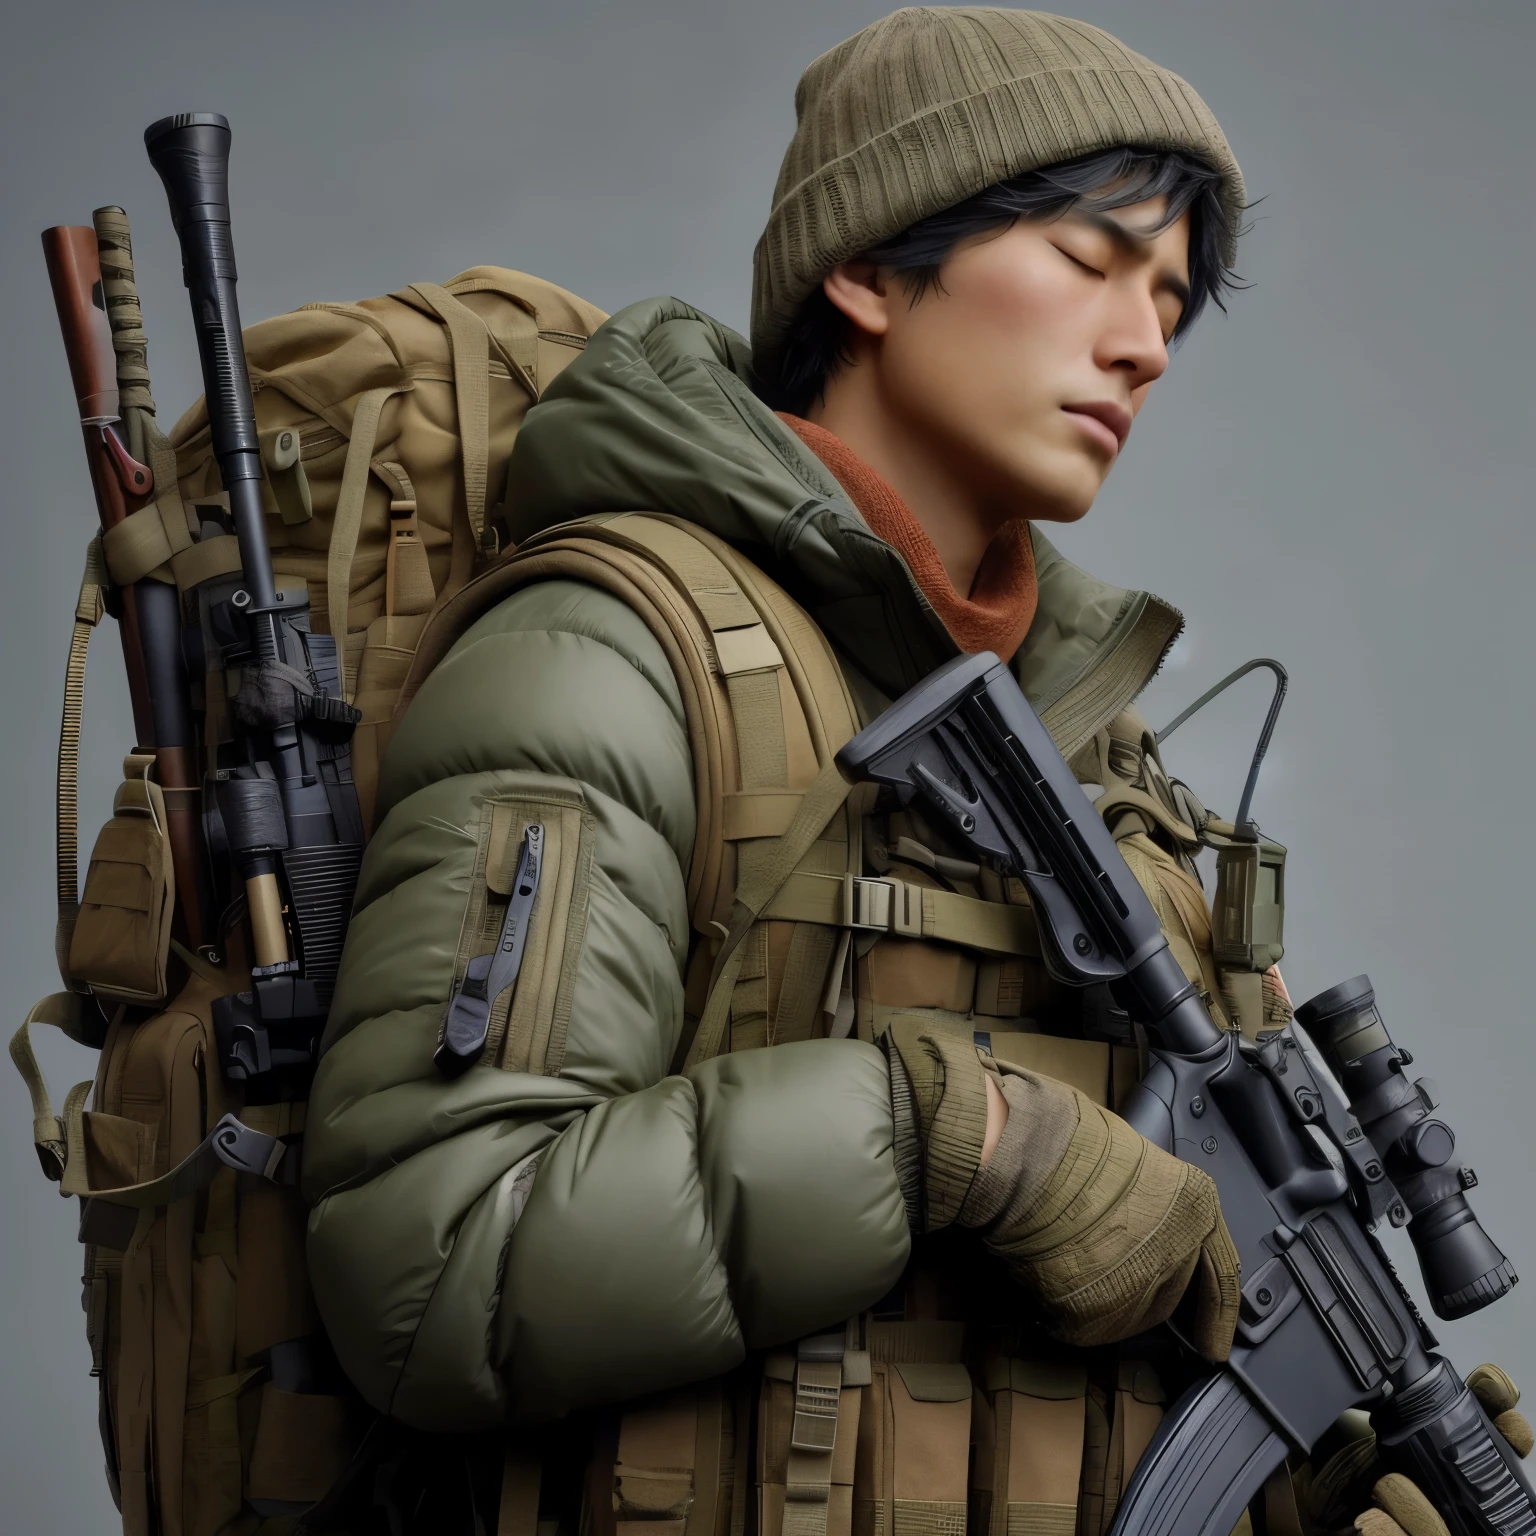 photorealistic、realistic skin texture、A beautiful Japanese woman who is a member of the American military　Skiing through the deep snow、I can see a high mountain in the distance、Backpack、Army Down Jacket、Knitted Cap、trekking poles、skiing、automatic rifle、bulletproof vest、moving action pose、face